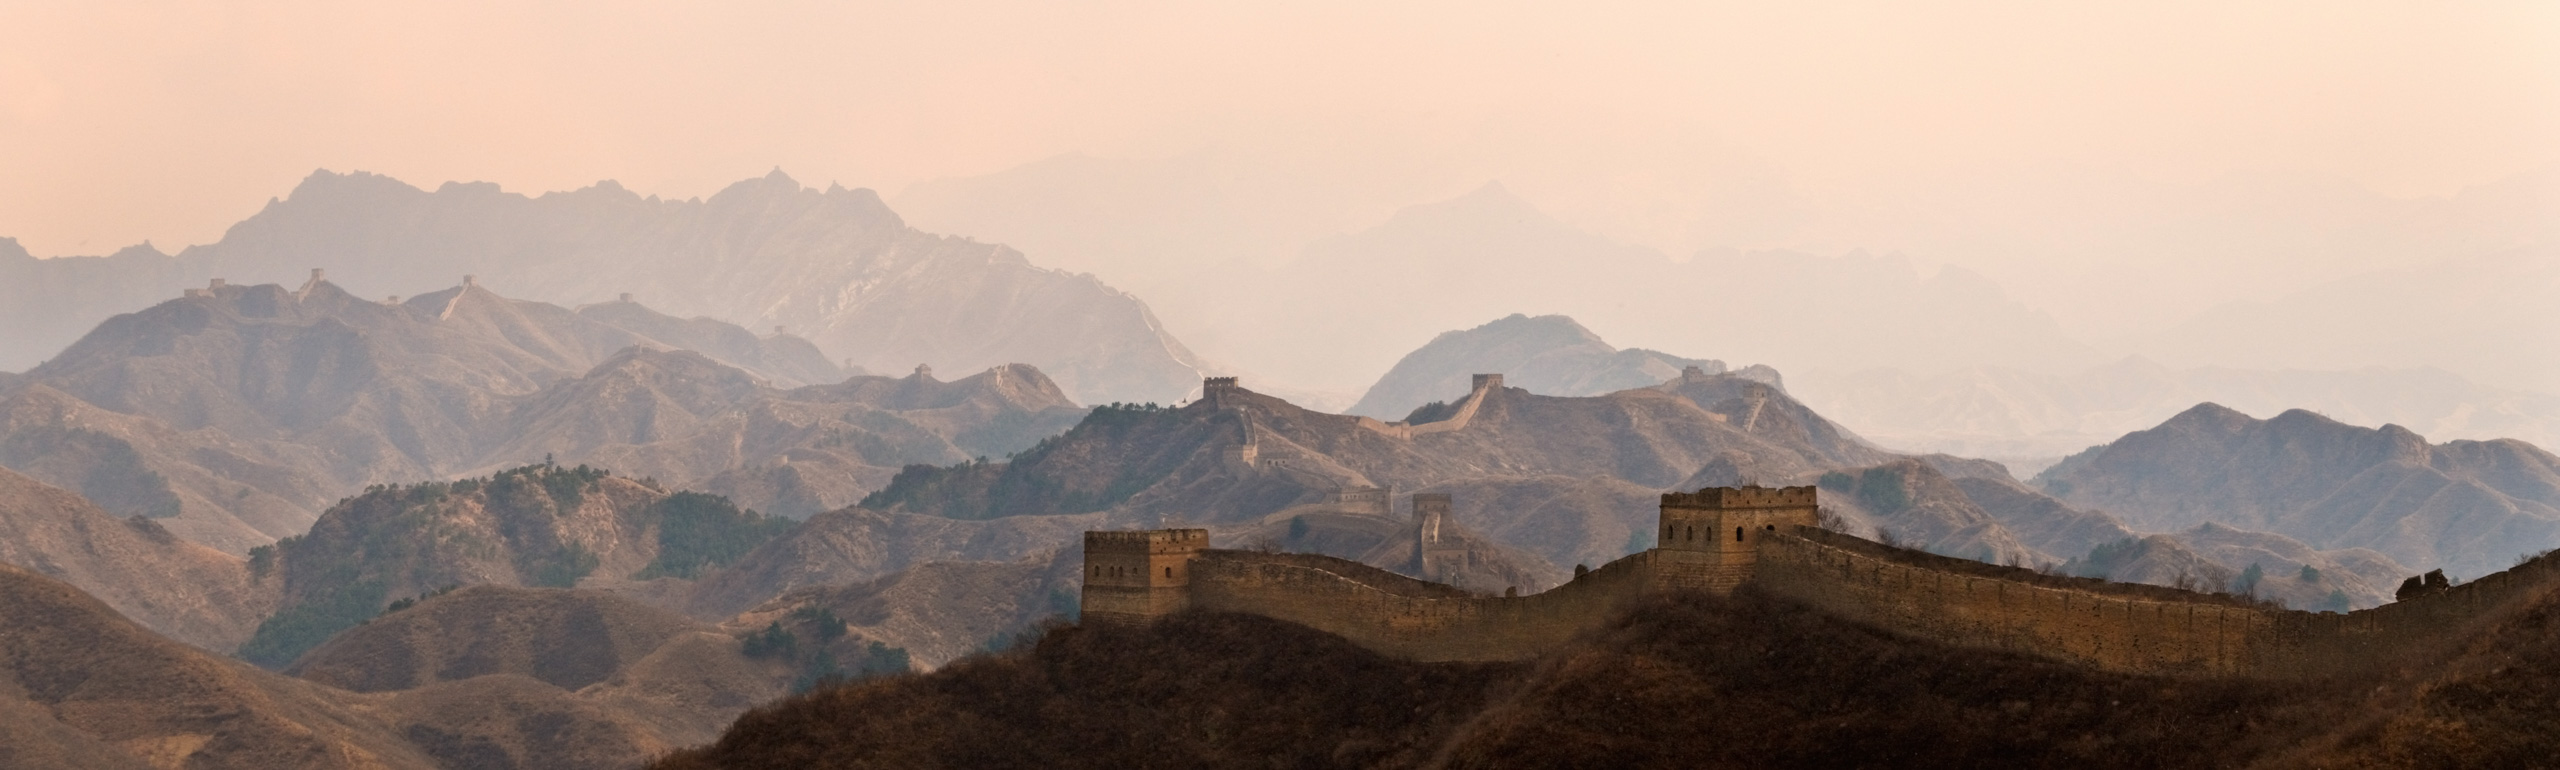 View of the Great Wall of China between Jinshanling and Simatai near Beijing at dawn on a misty day